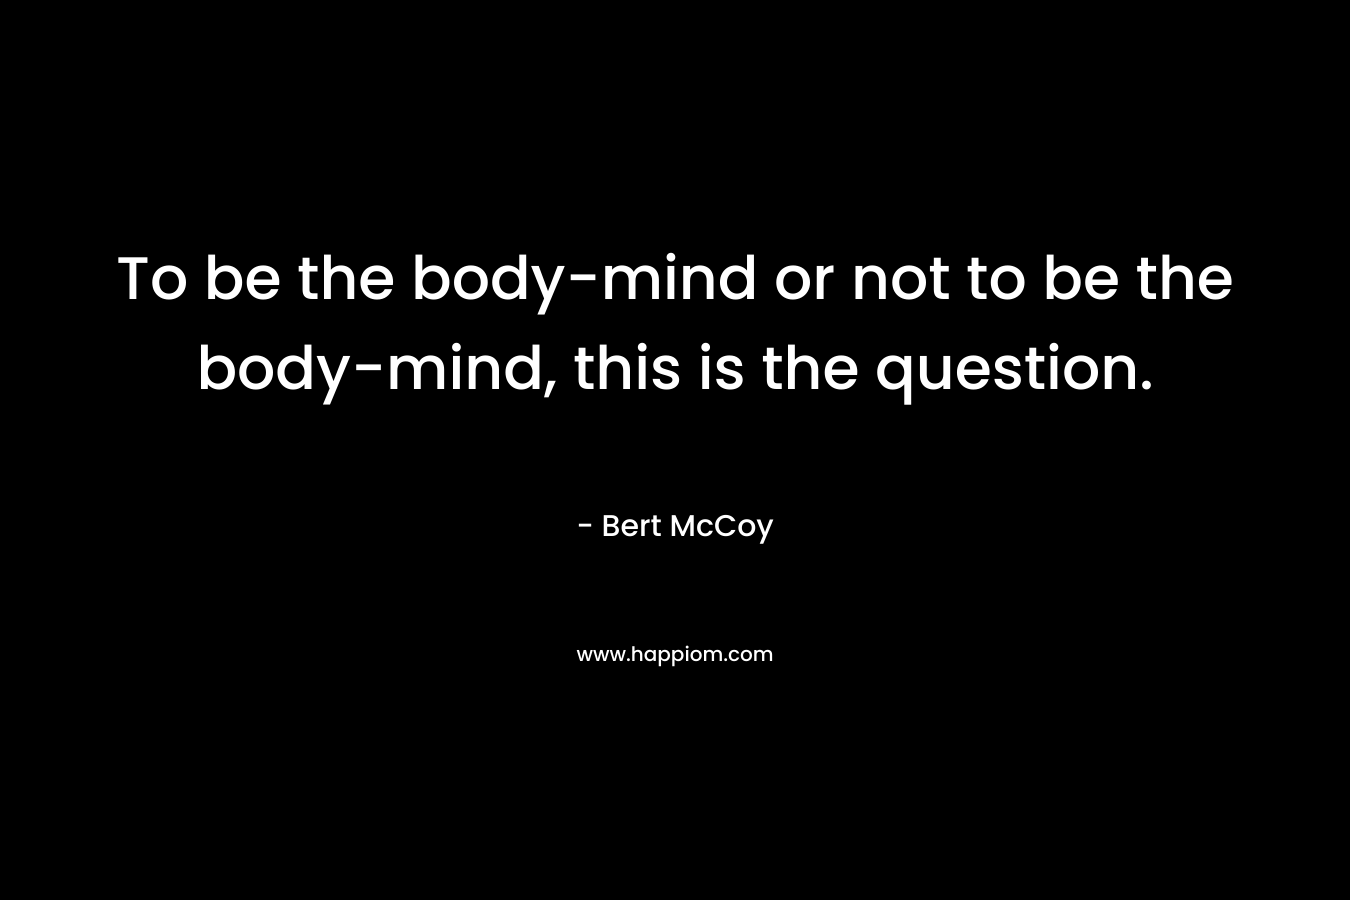 To be the body-mind or not to be the body-mind, this is the question.